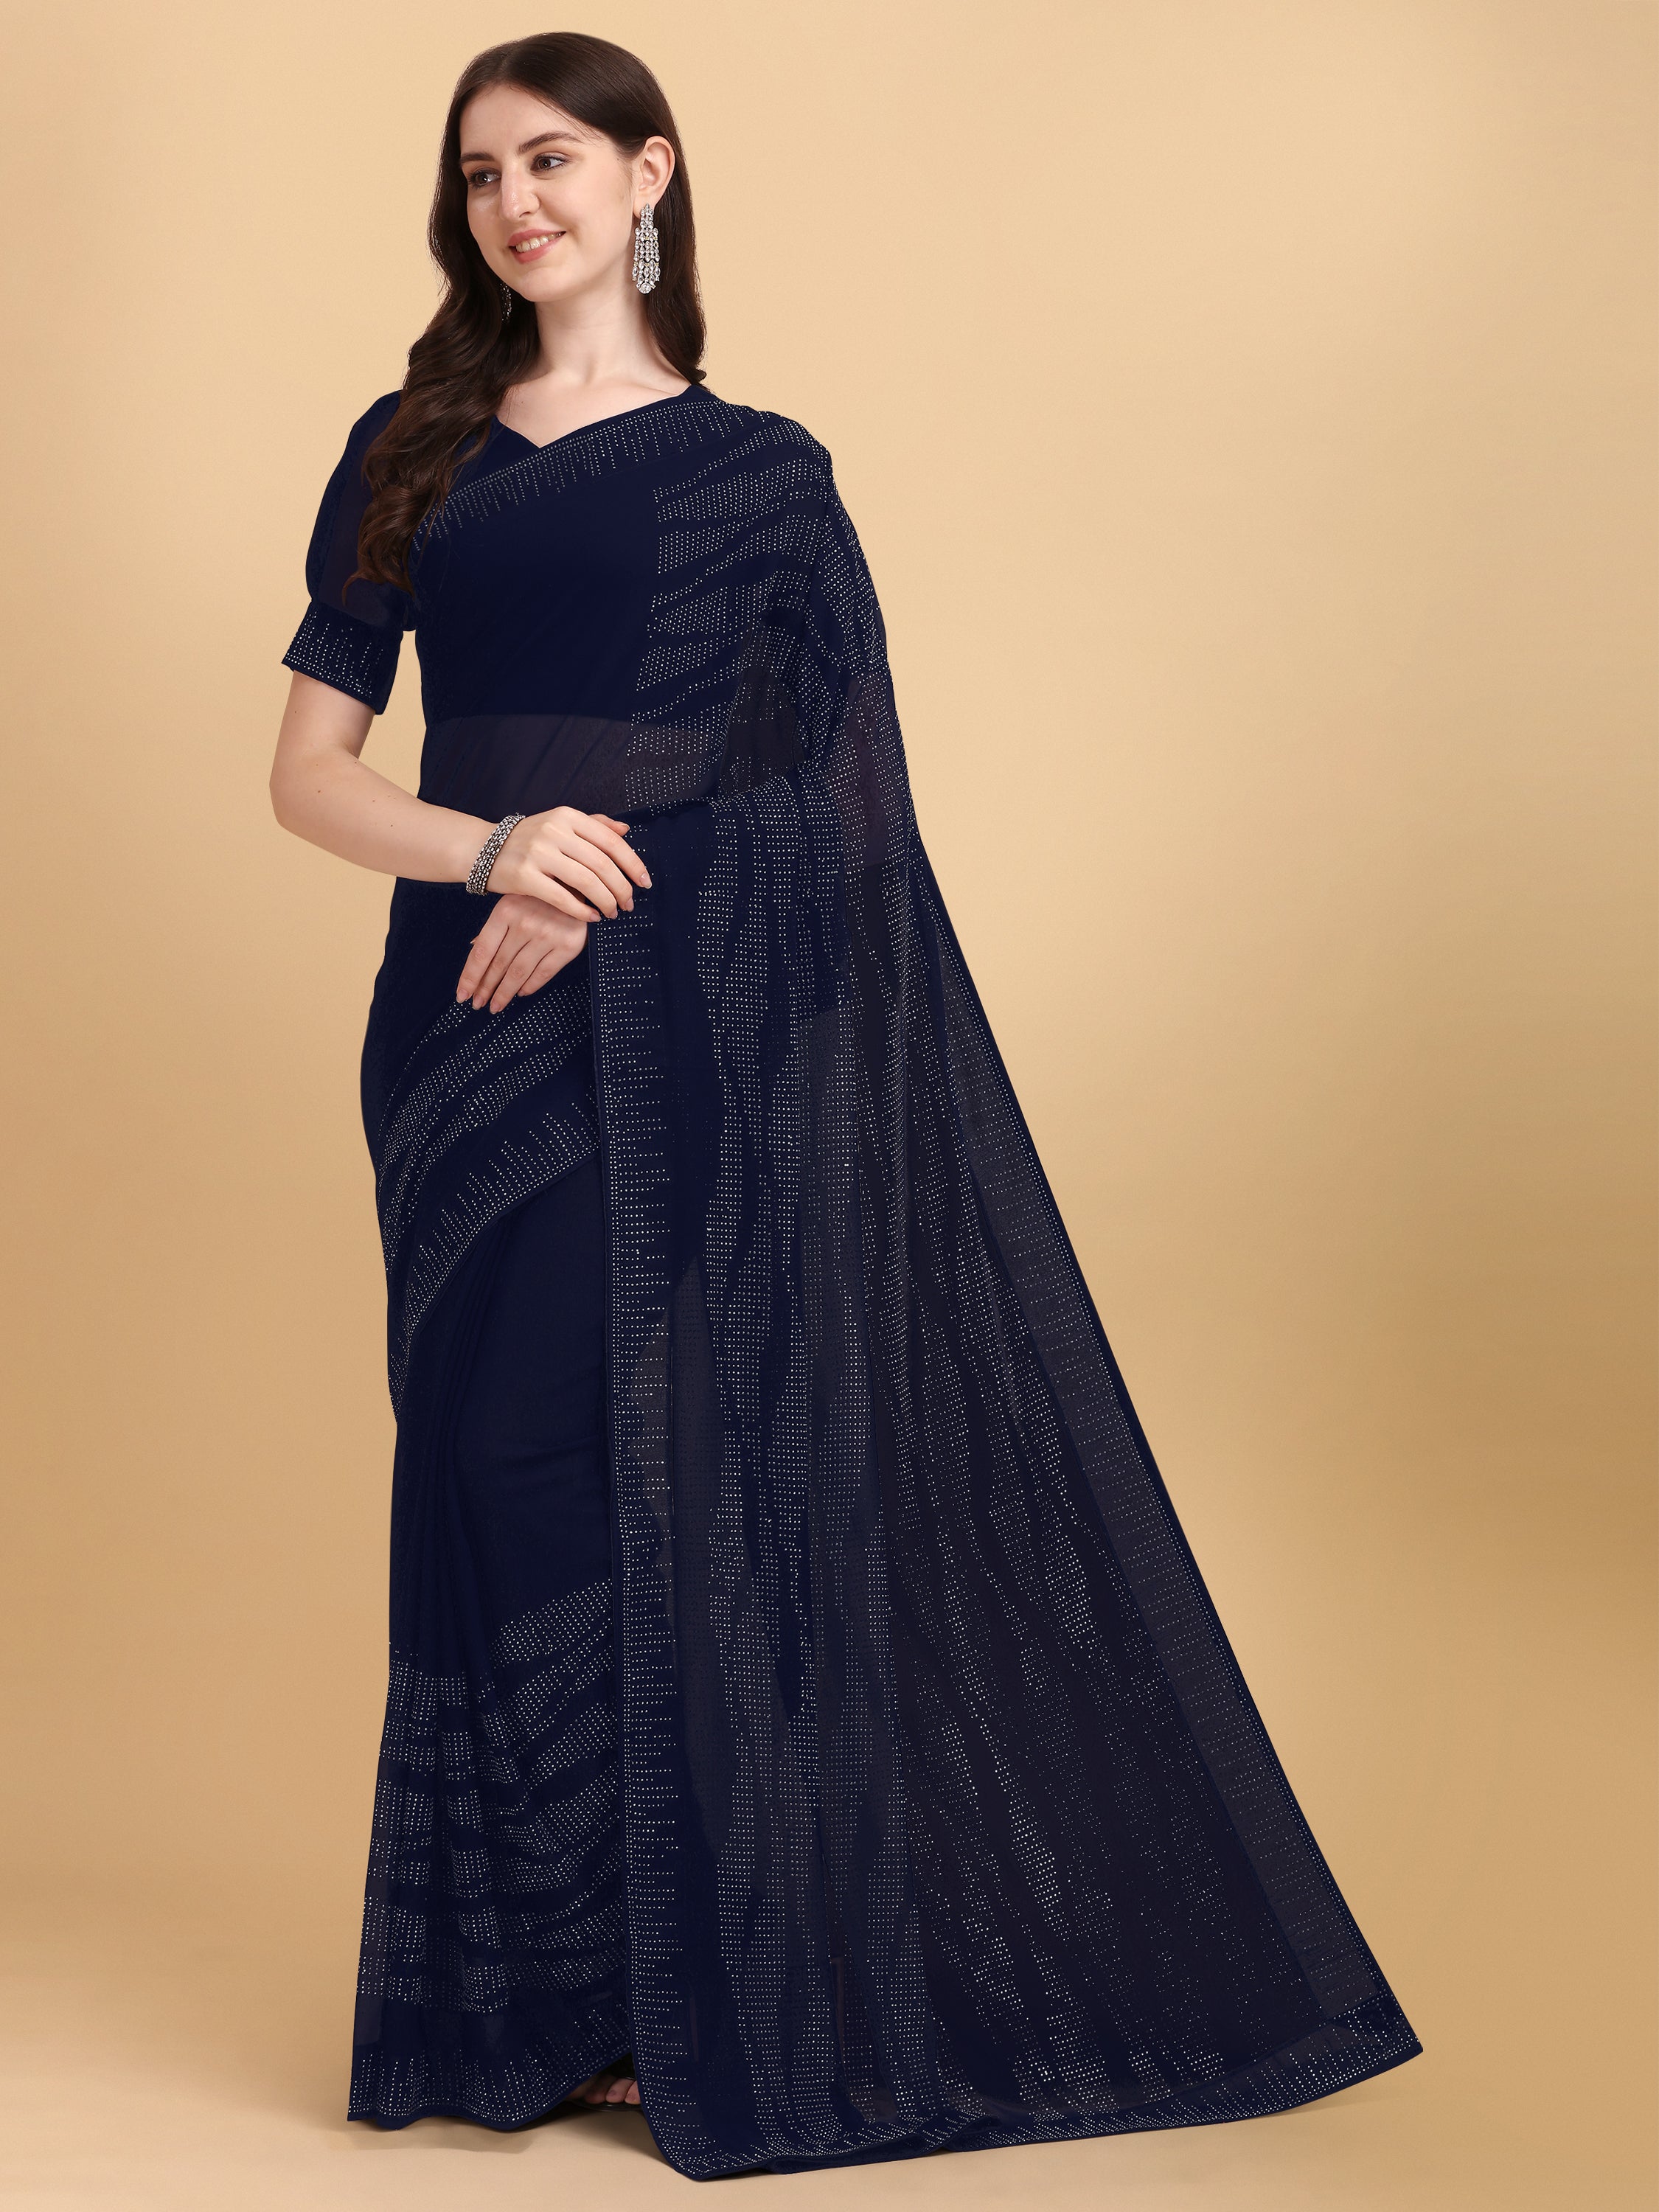 Women's Emblishment Occasion Wear Georgette Saree With Blouse Piece (Navy Blue) - NIMIDHYA